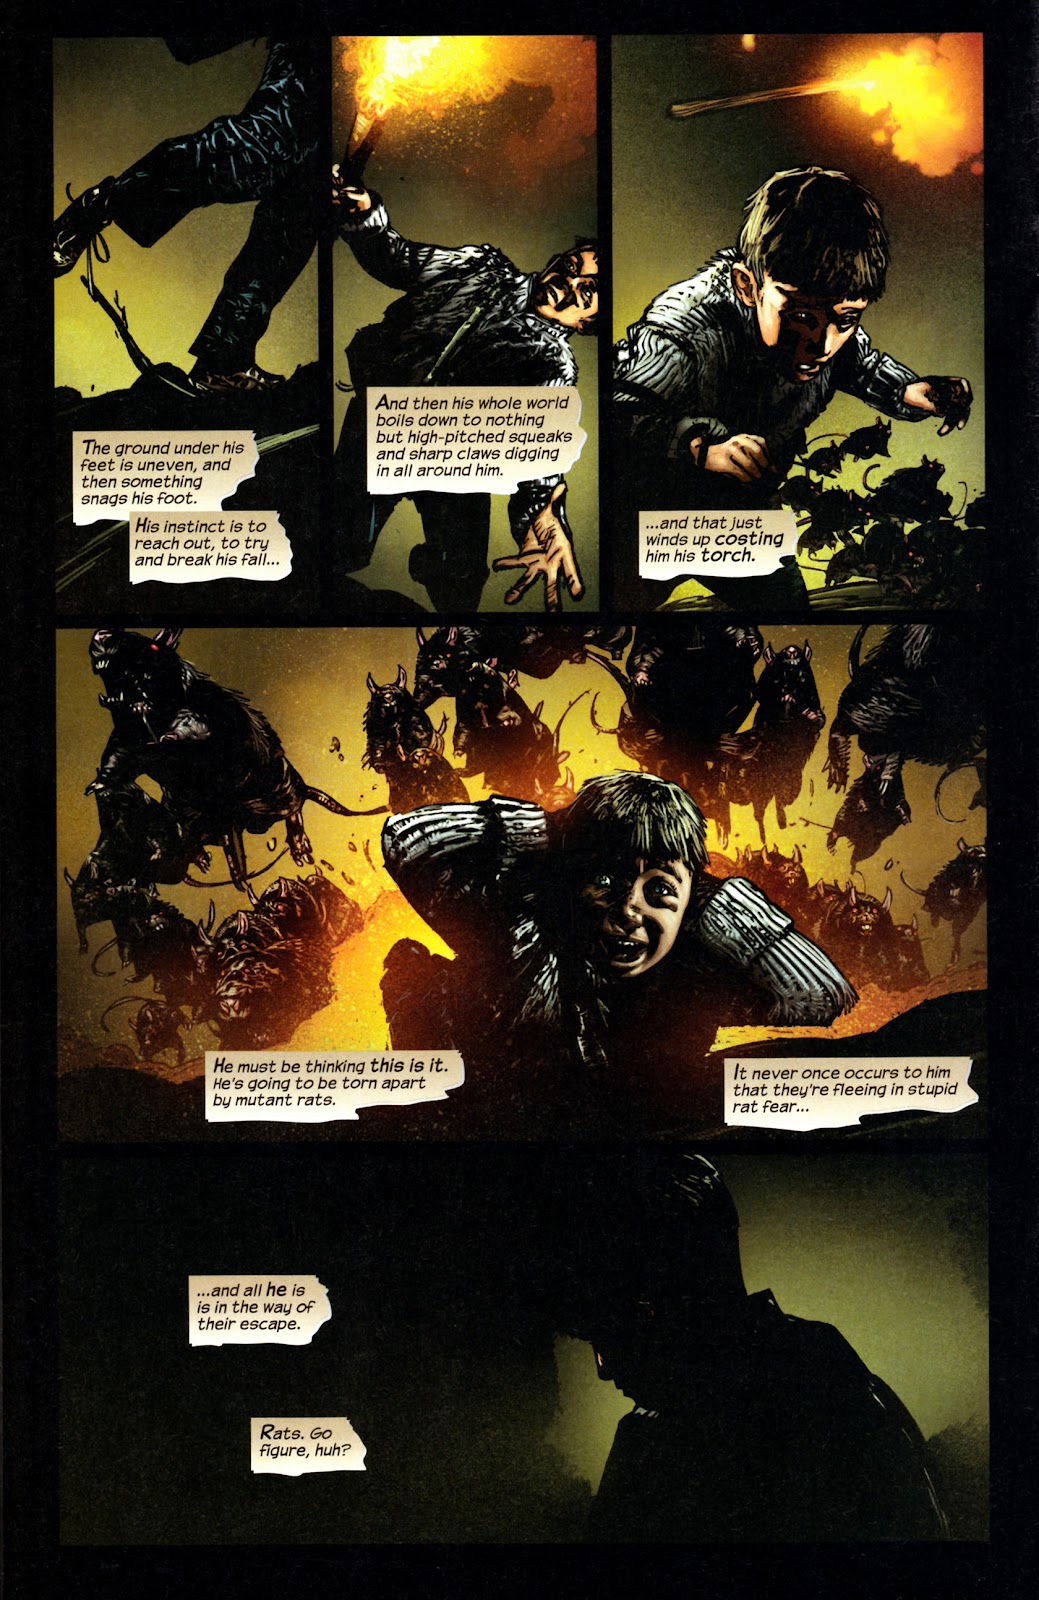 Dark Tower: The Gunslinger - The Man in Black issue 1 - Page 16